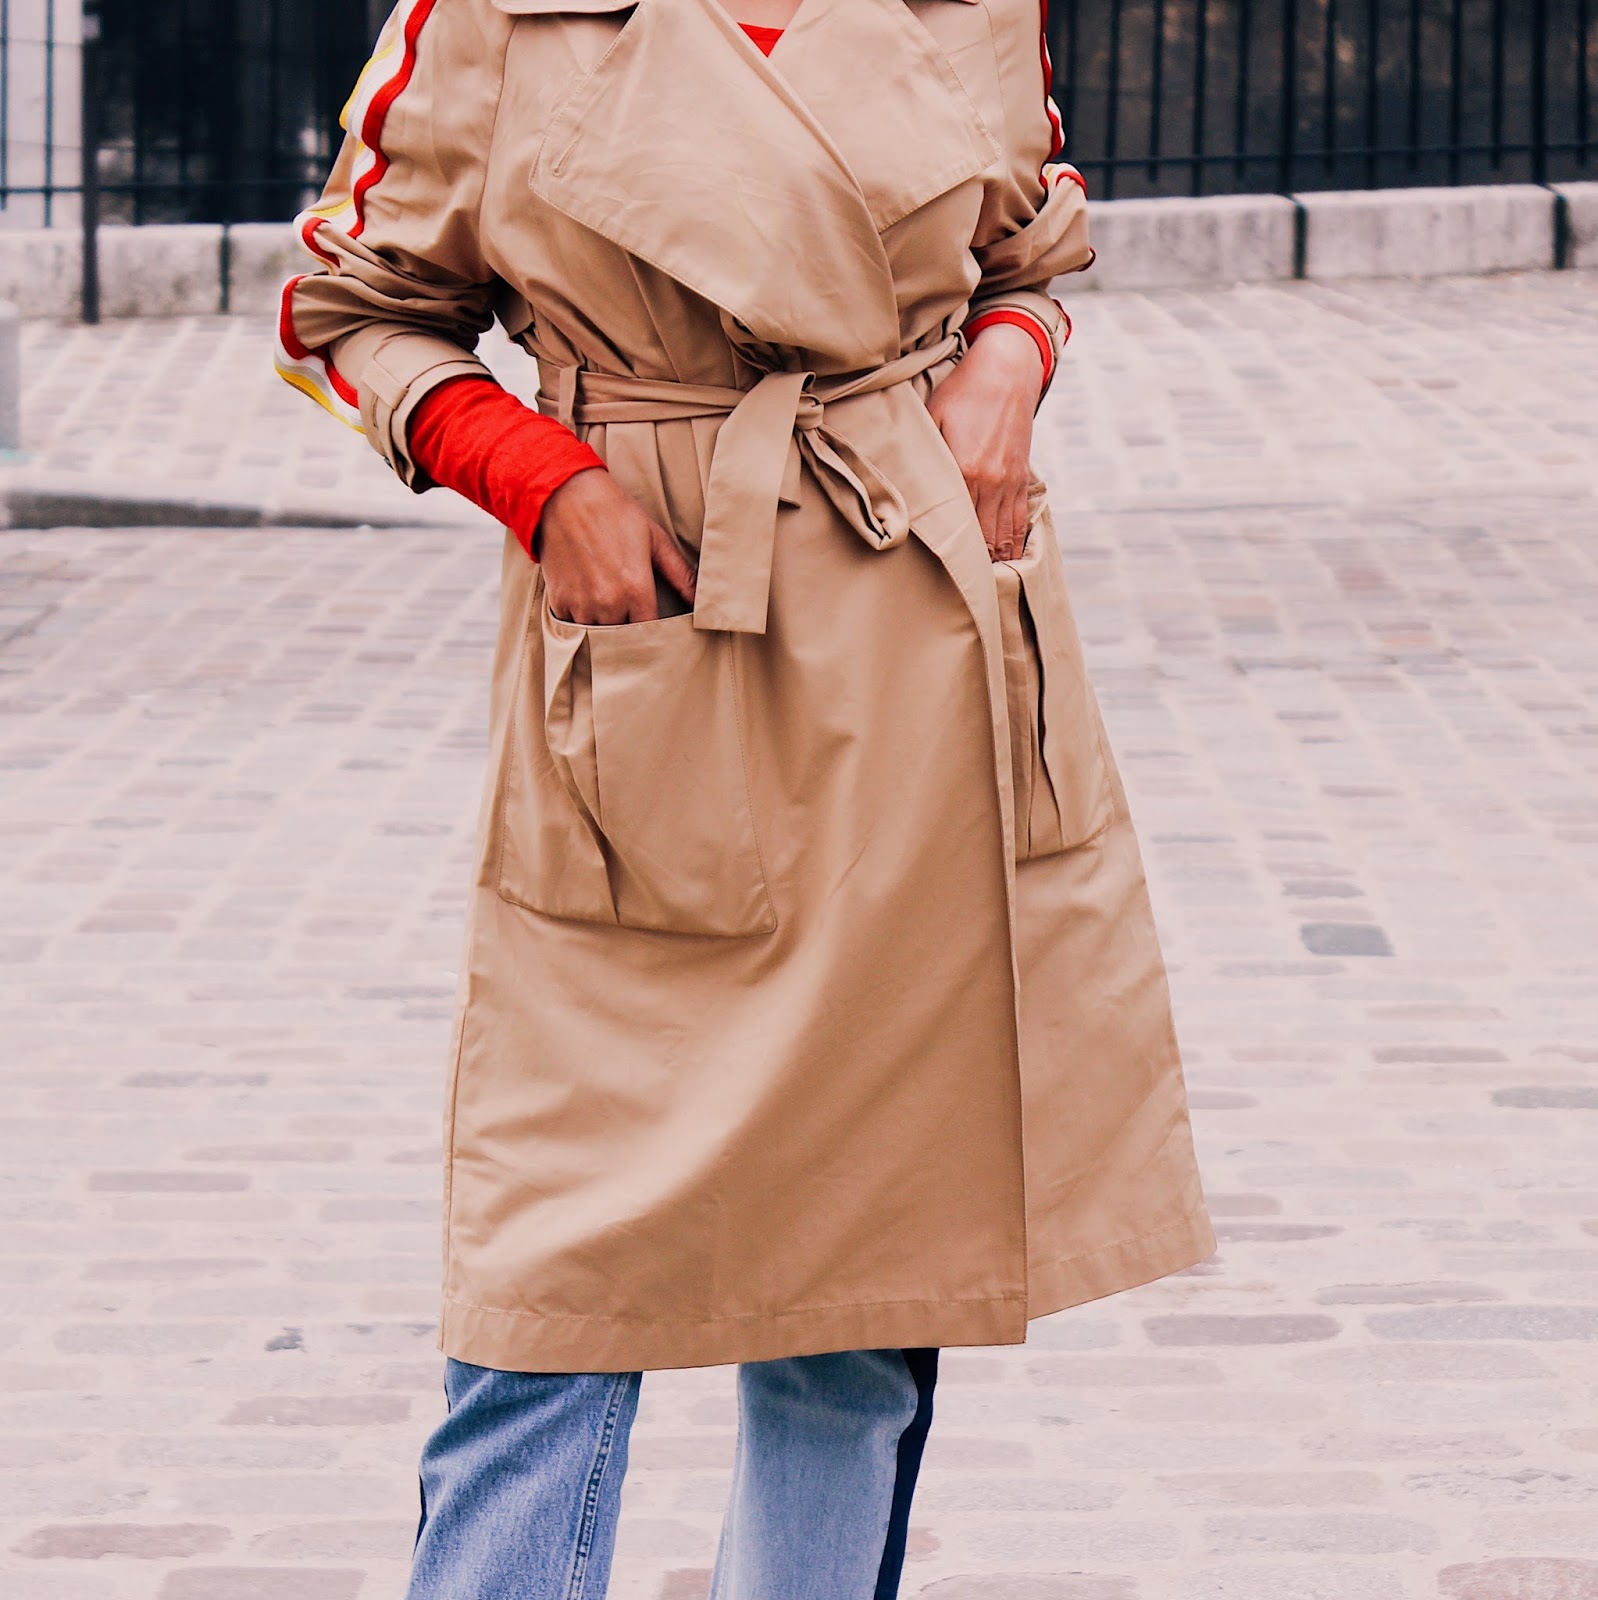 paris outfit, paris street style, paris spring summer fashion, beret, red beret, trench coat, what to wear in paris, indian blogger, uk blog, effortless chic, parisian chic, french style